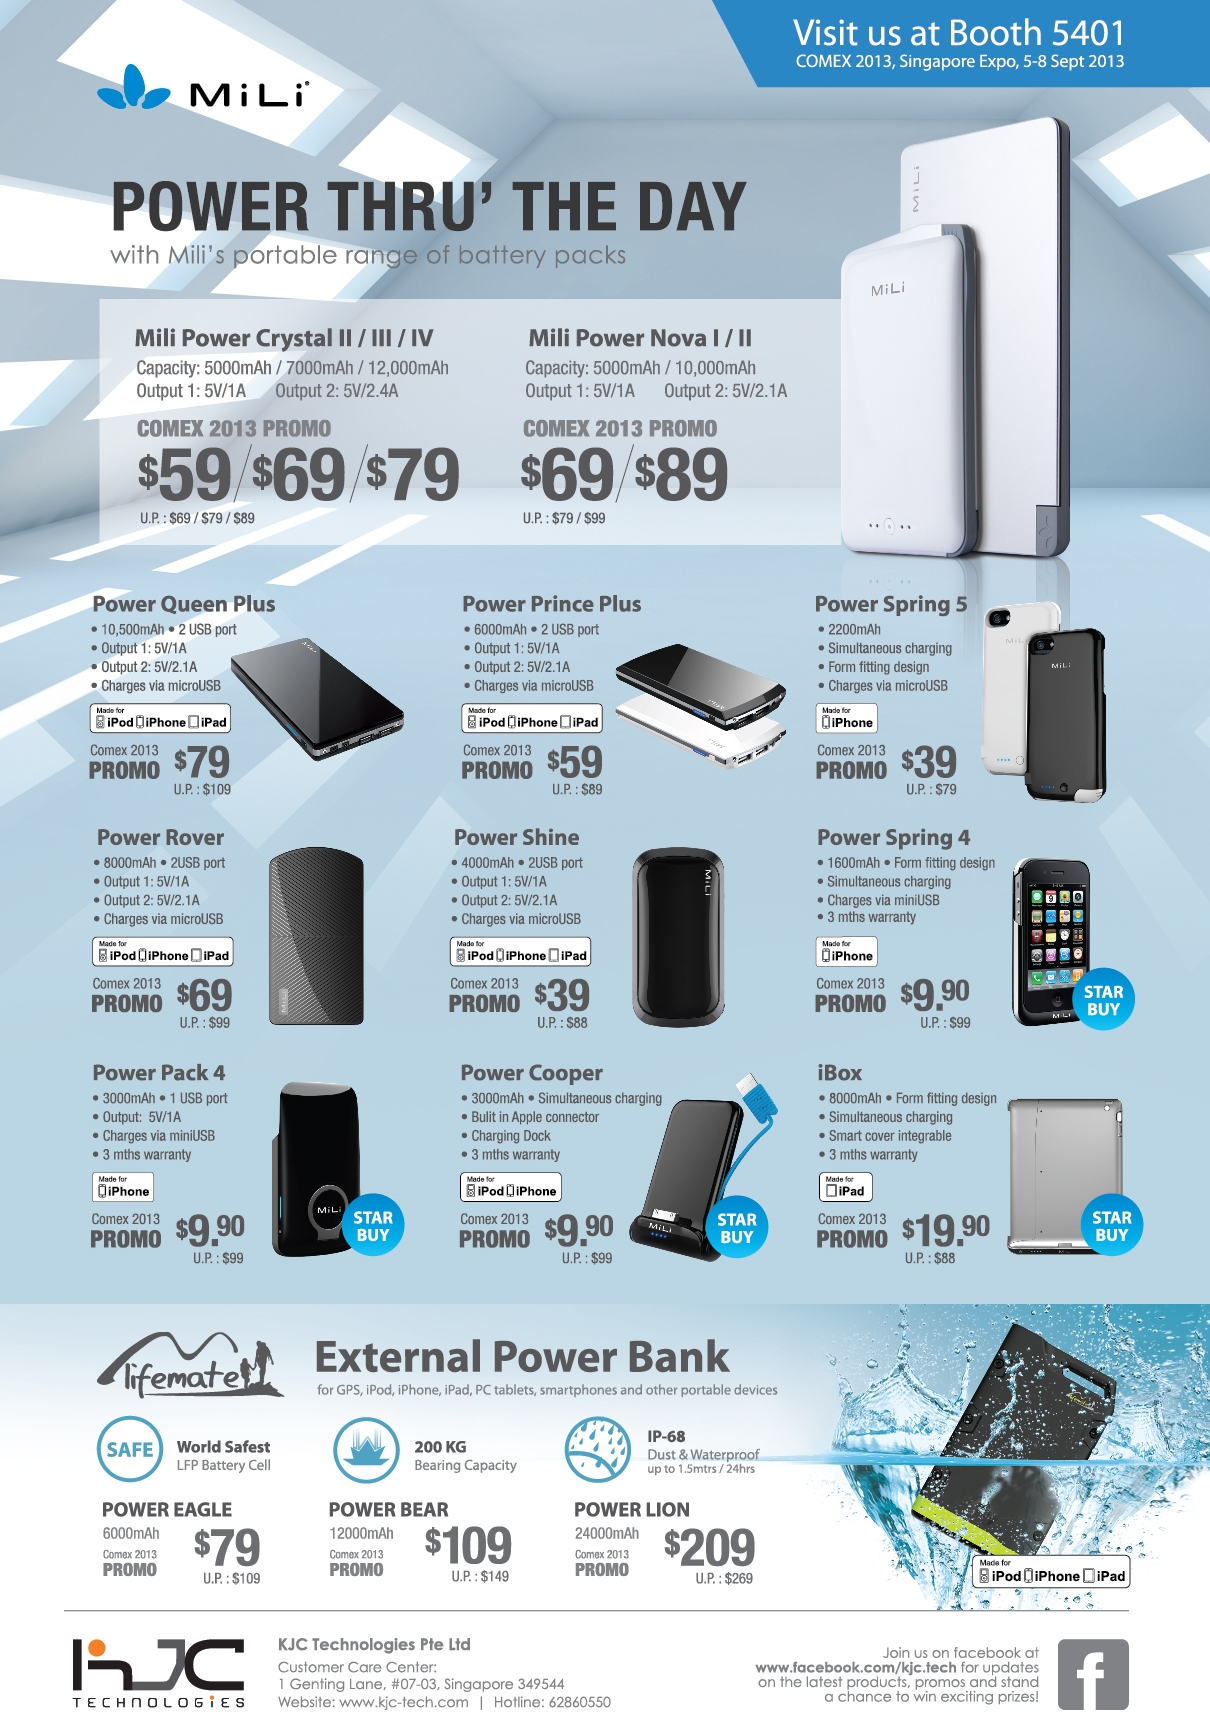 COMEX 2013 price list image brochure of KJC MiLi External Power Chargers Power Crystal, Power Nova, Queen Plus, Prince, Spring, Shine, Rover, Cooper, Lifemate Eagle, Bear, Lion